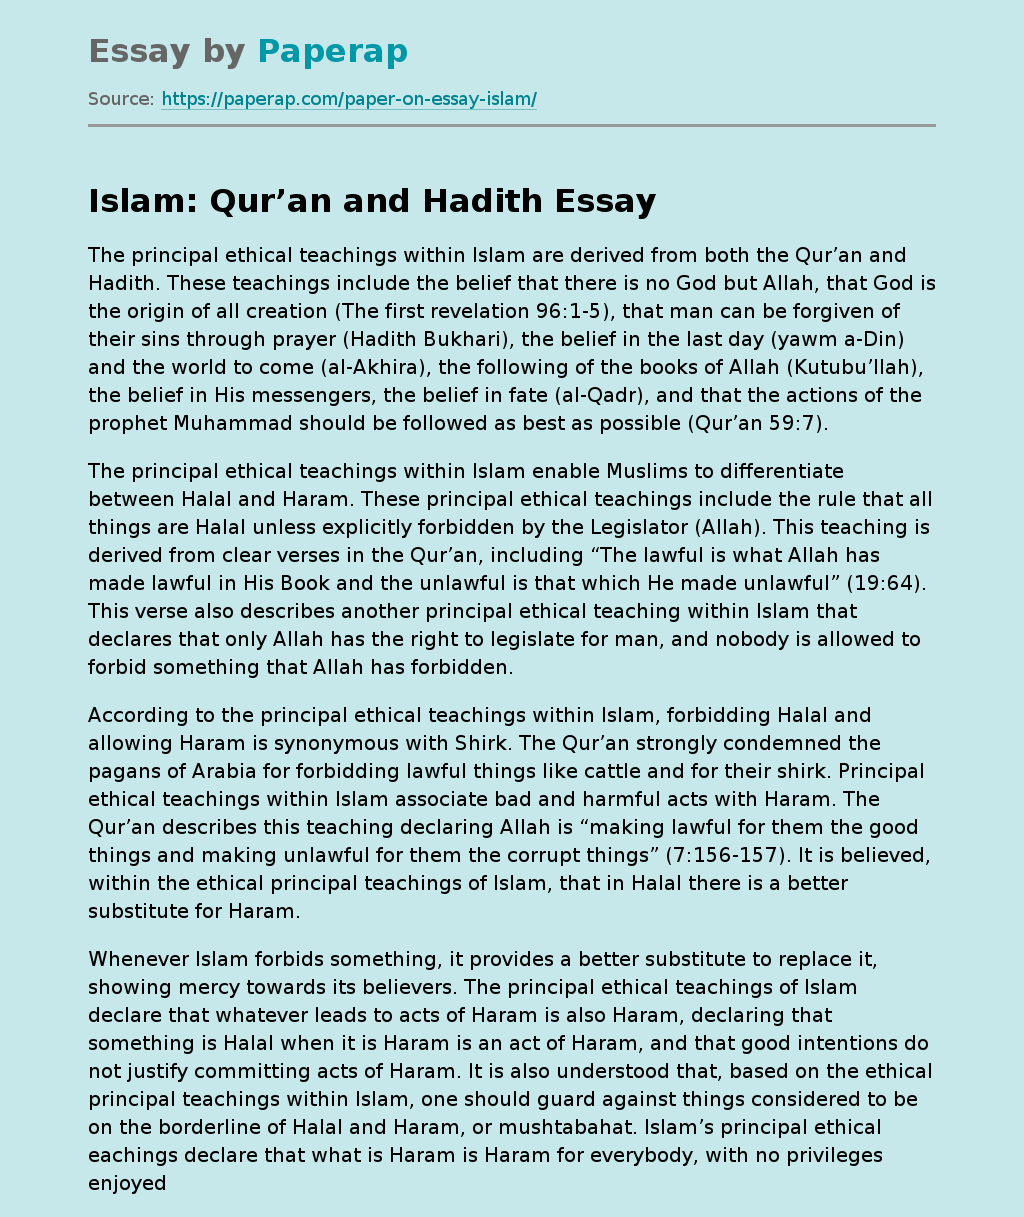 Islam: Qur’an and Hadith